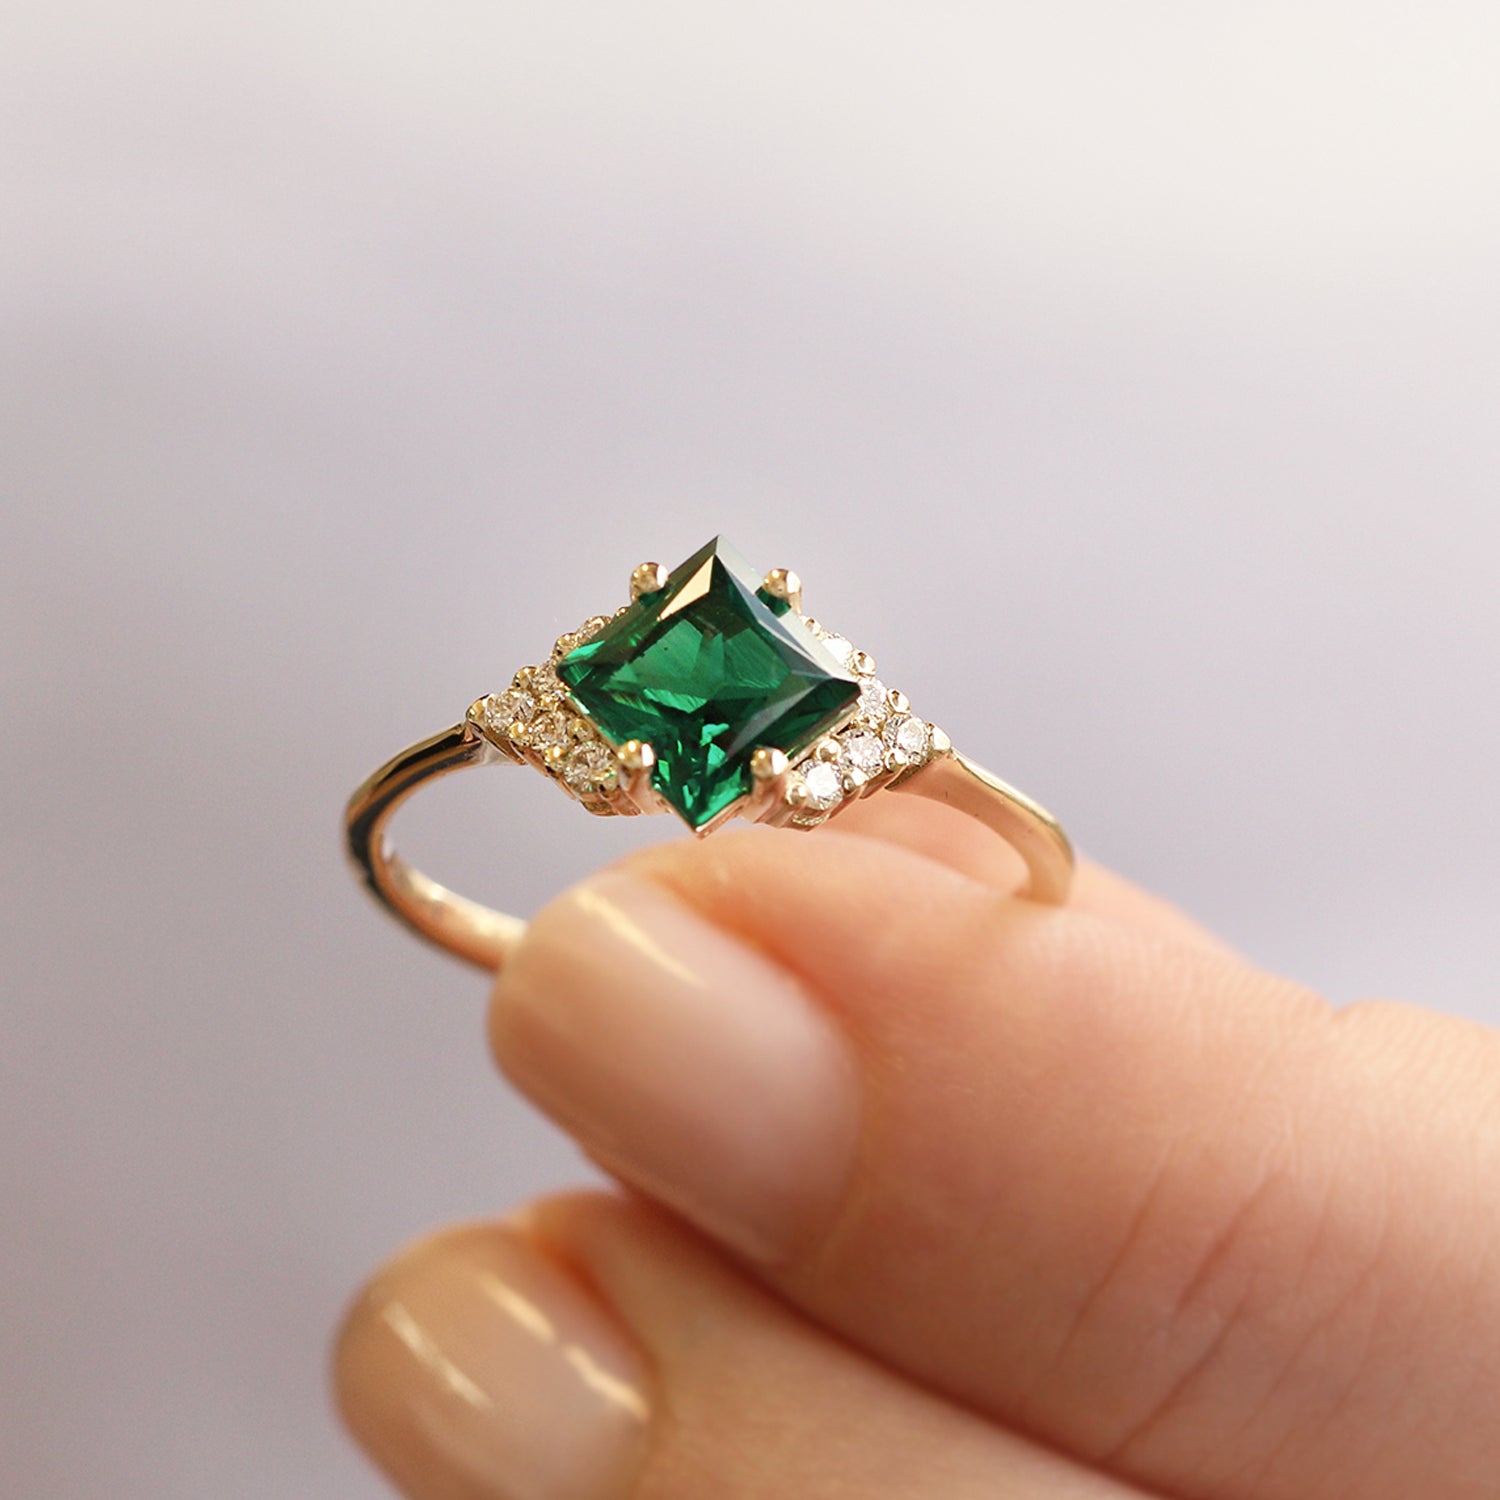 Juliette Ring With Diamonds and Emerald